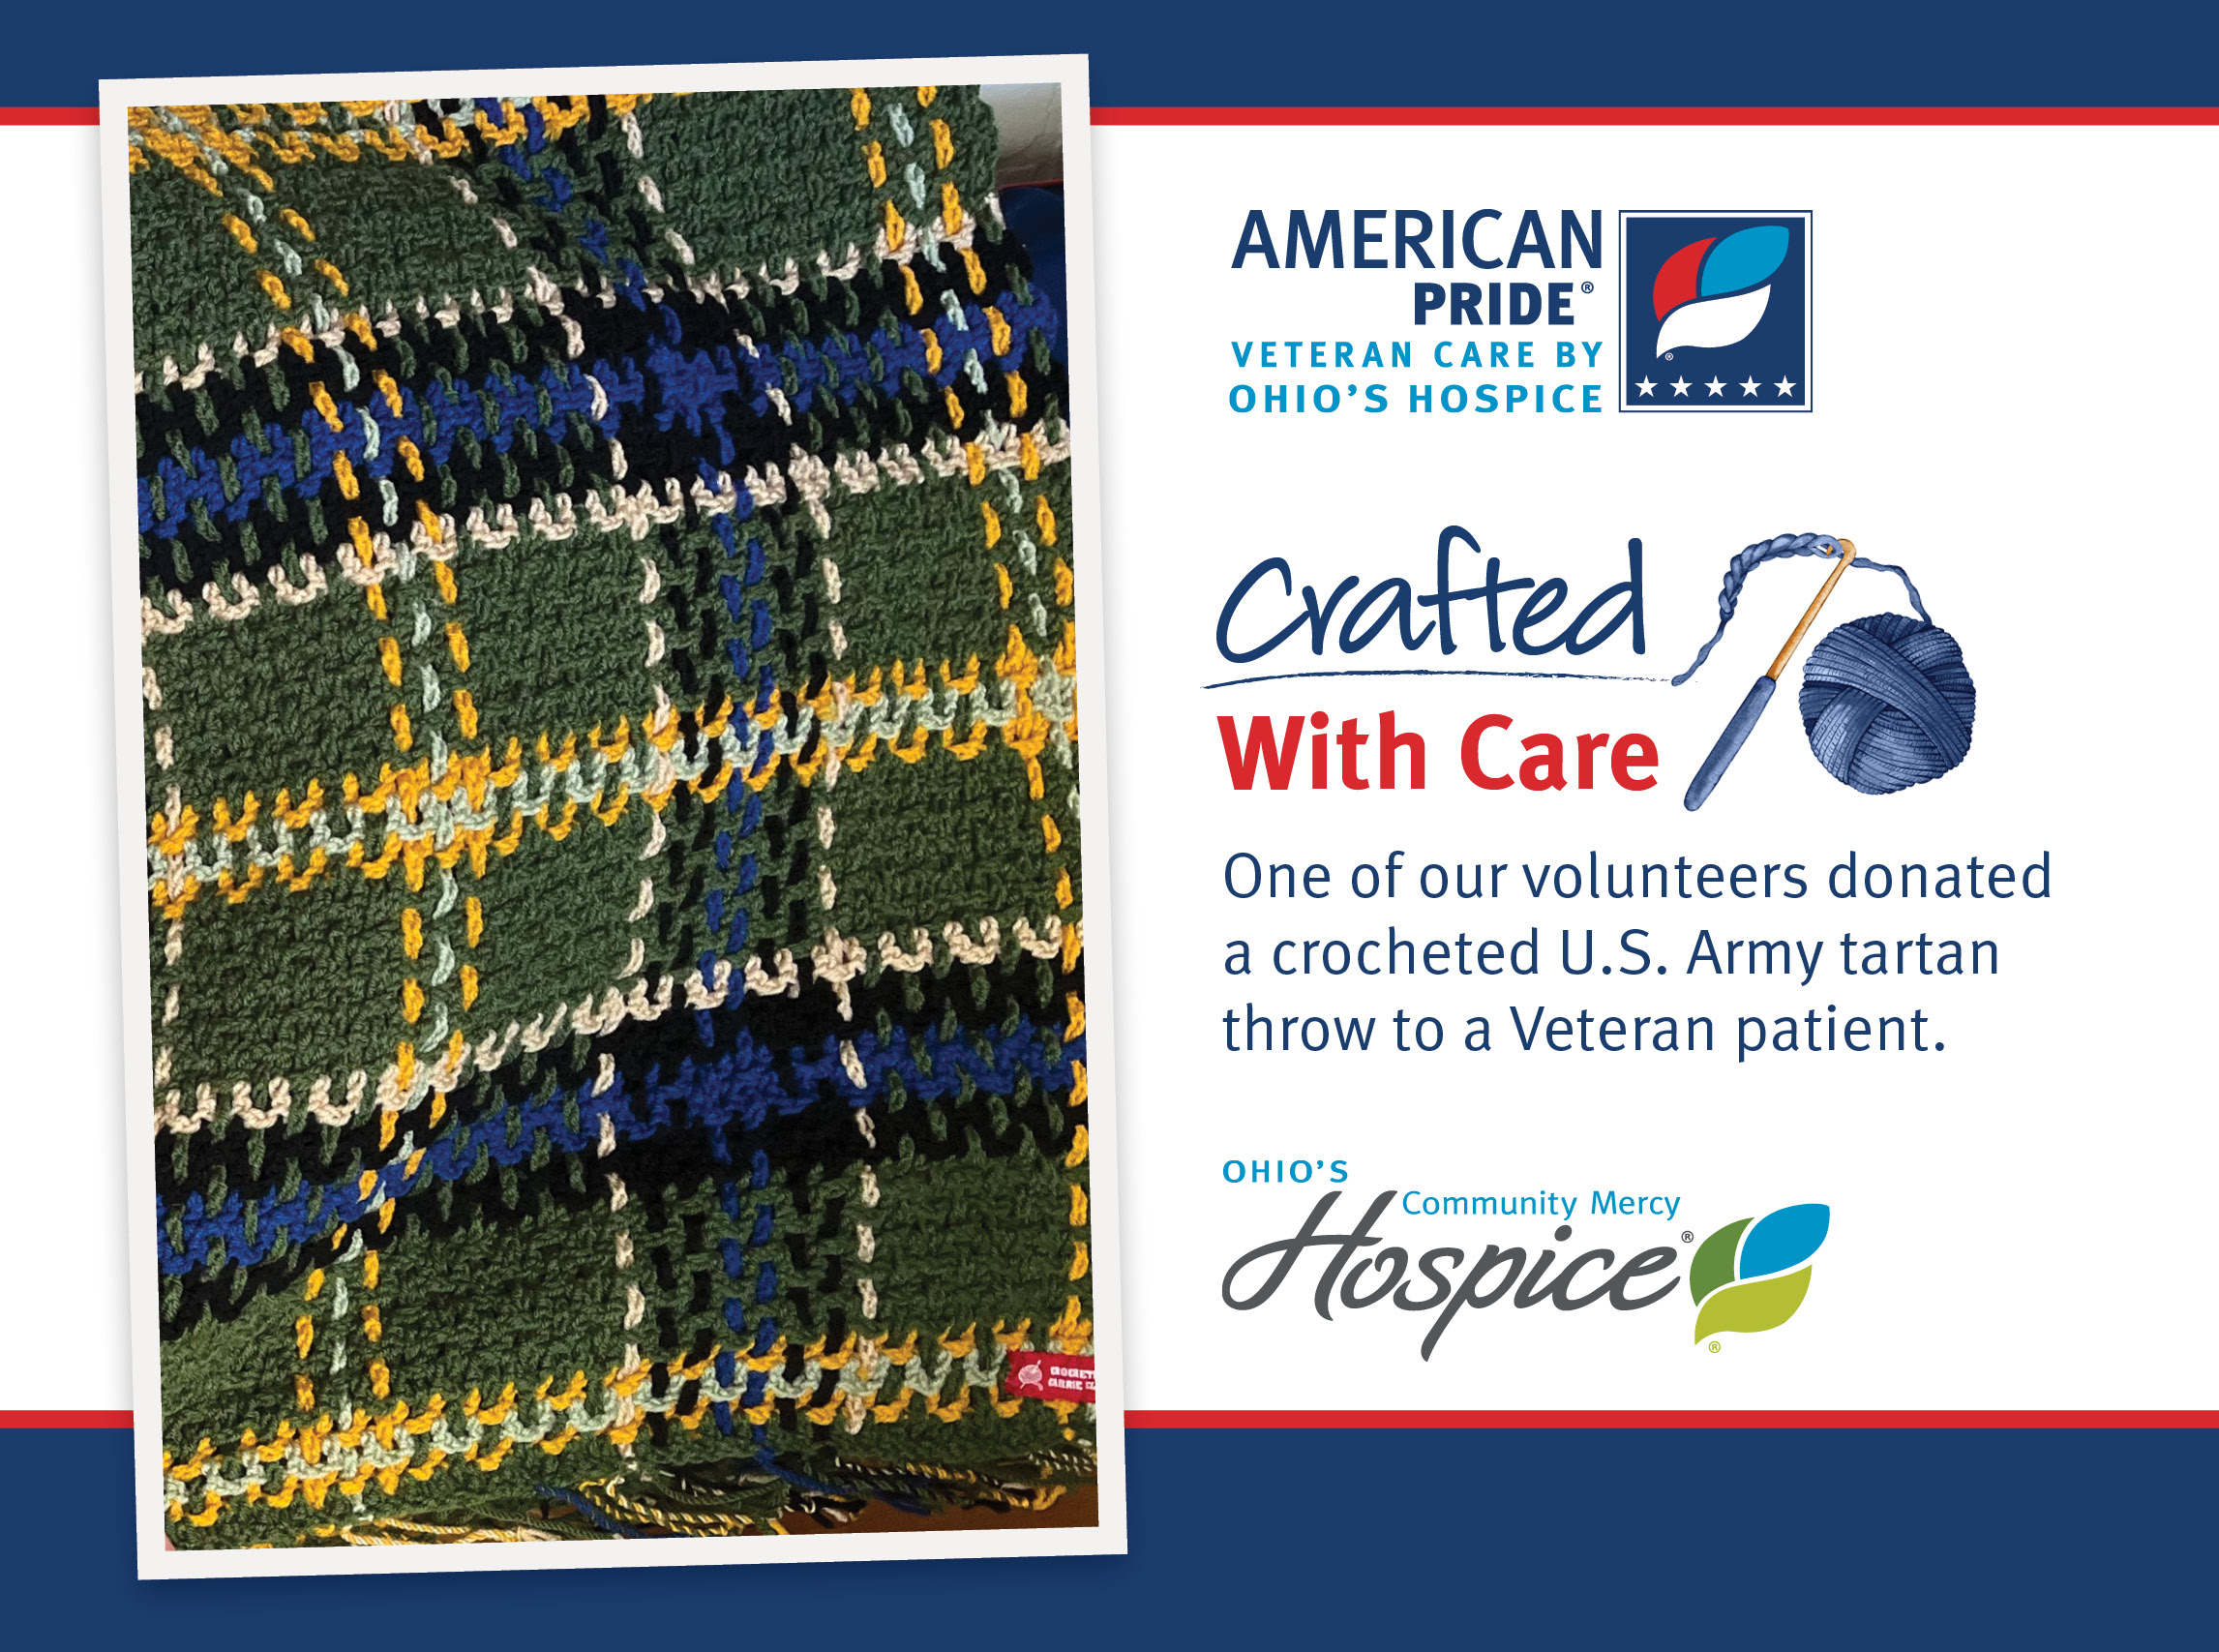 Crafted With Care - One of our volunteers donated a crocheted U.S. Army tartan throw to a Veteran patient. | Ohio's Community Mercy Hospice